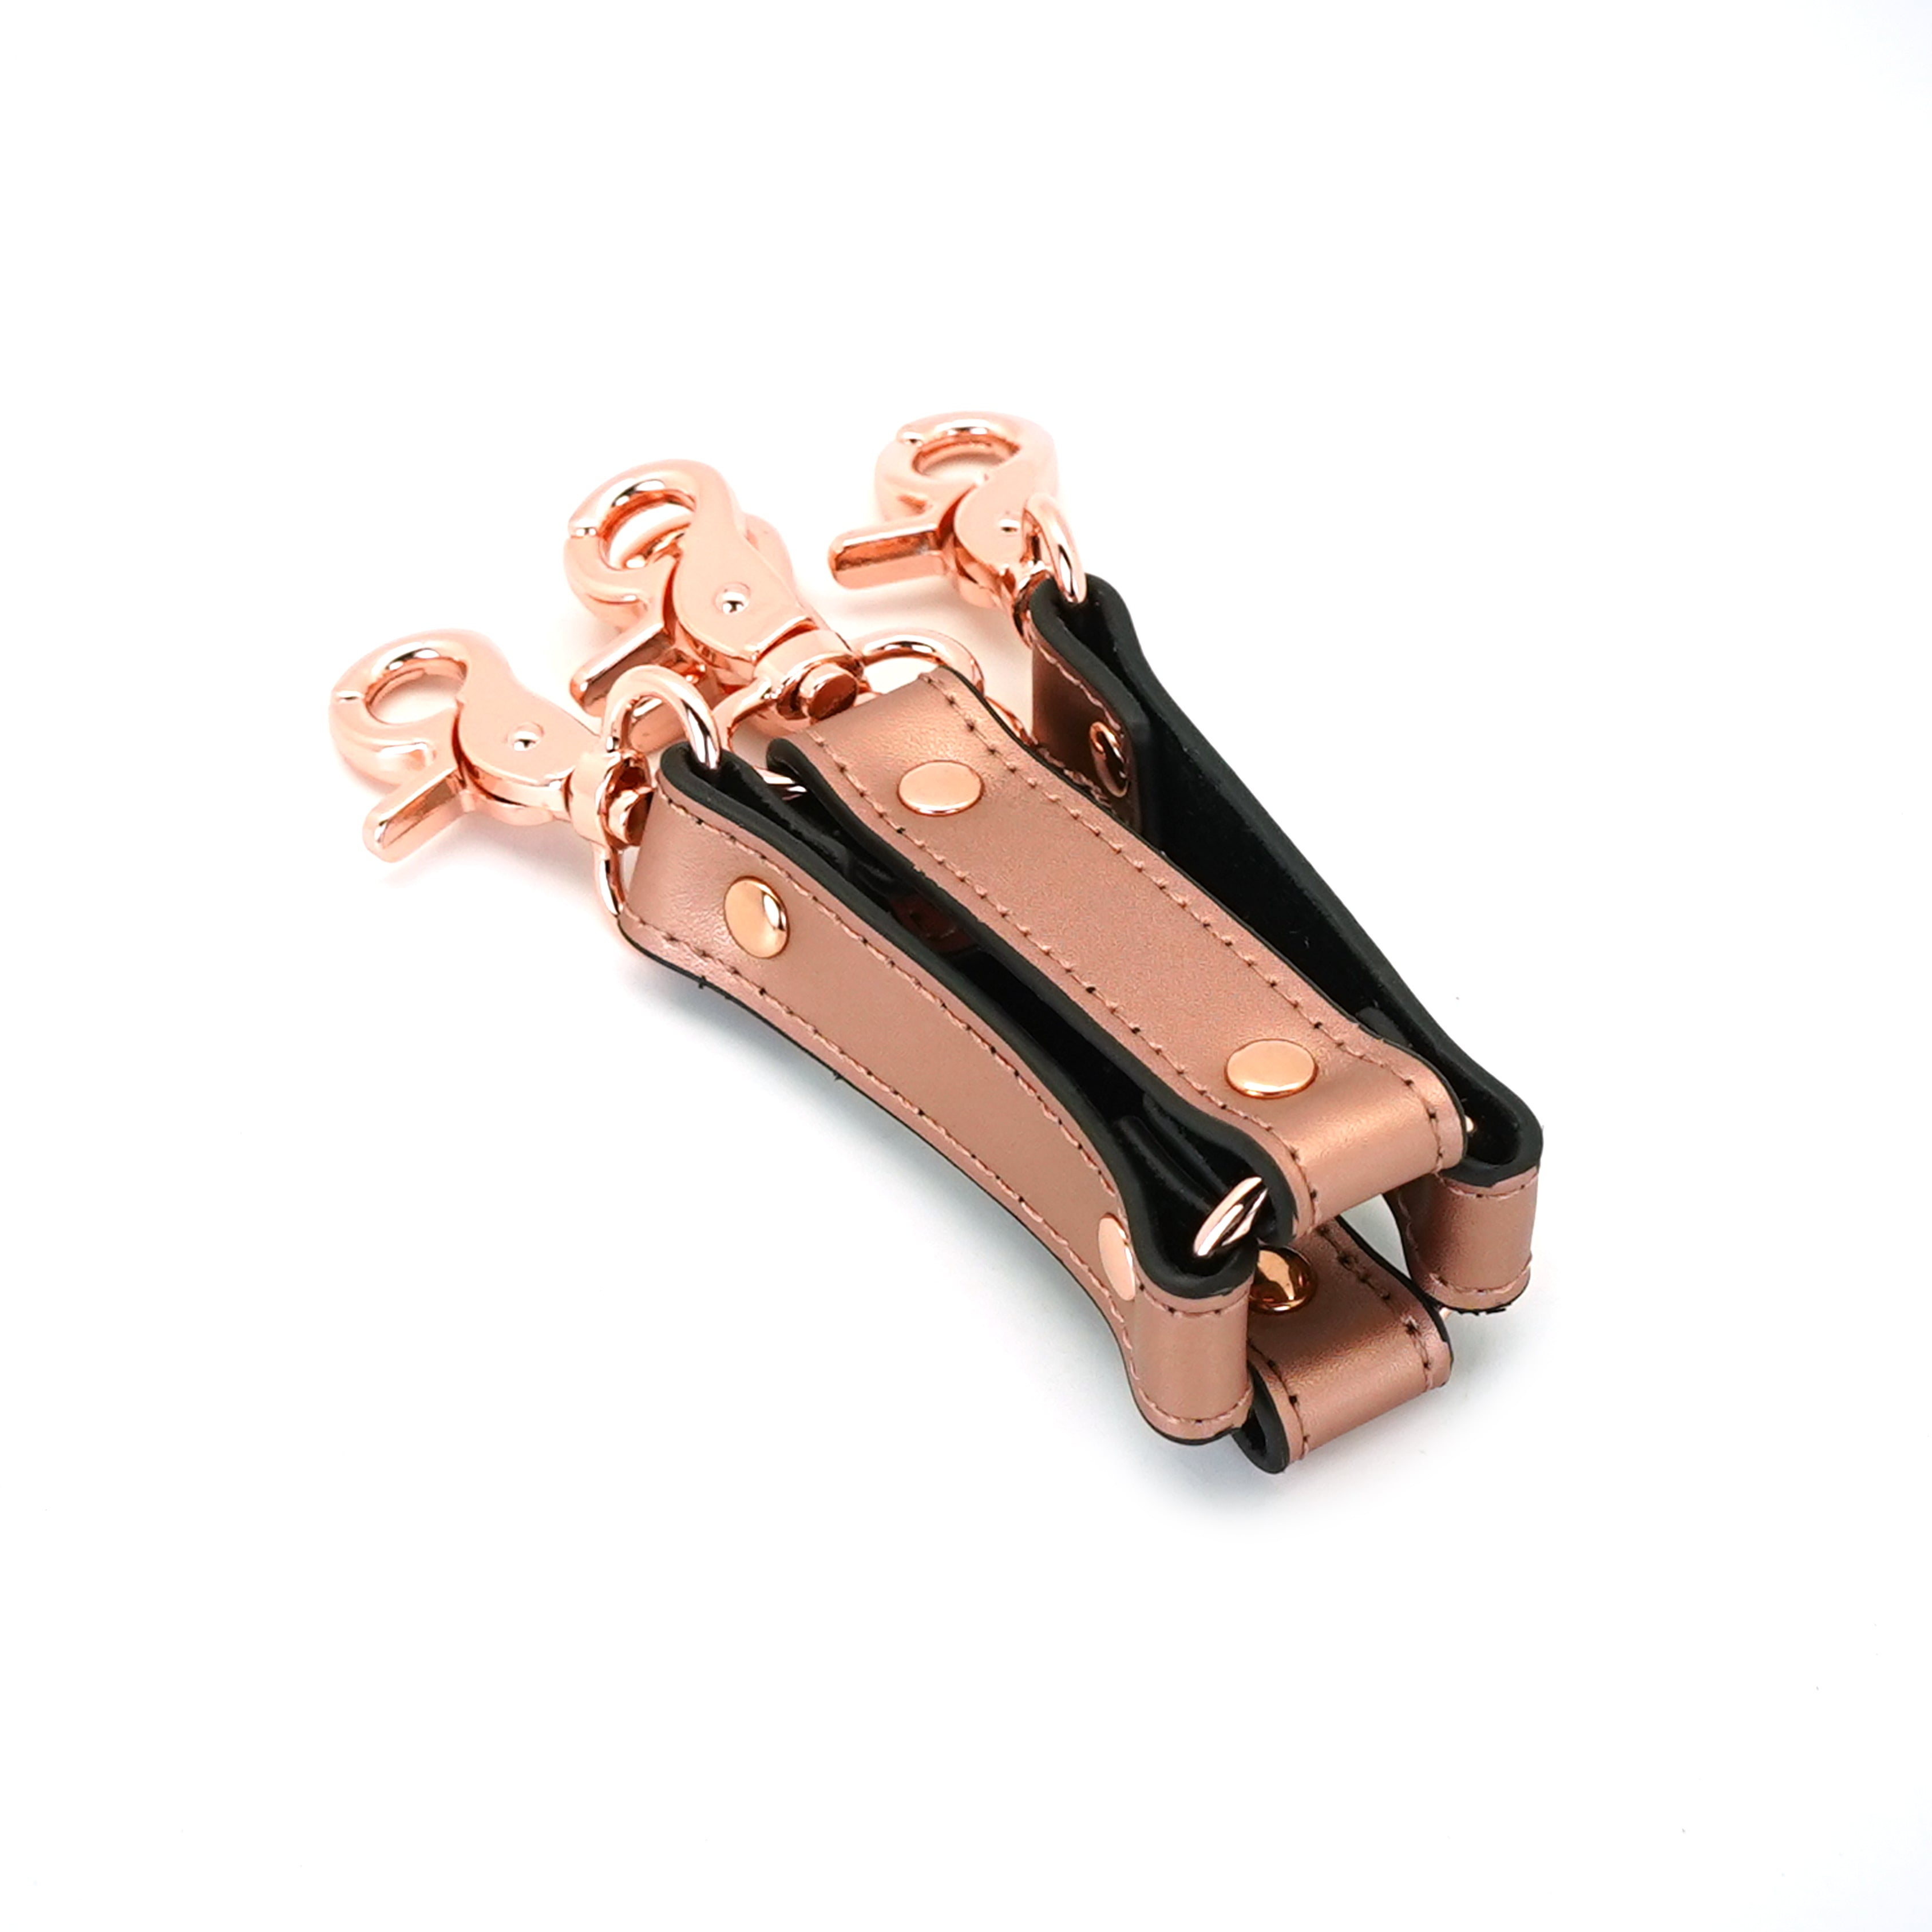 Hogtie - Memory: The Rose Gold Luxury BDSM Collection